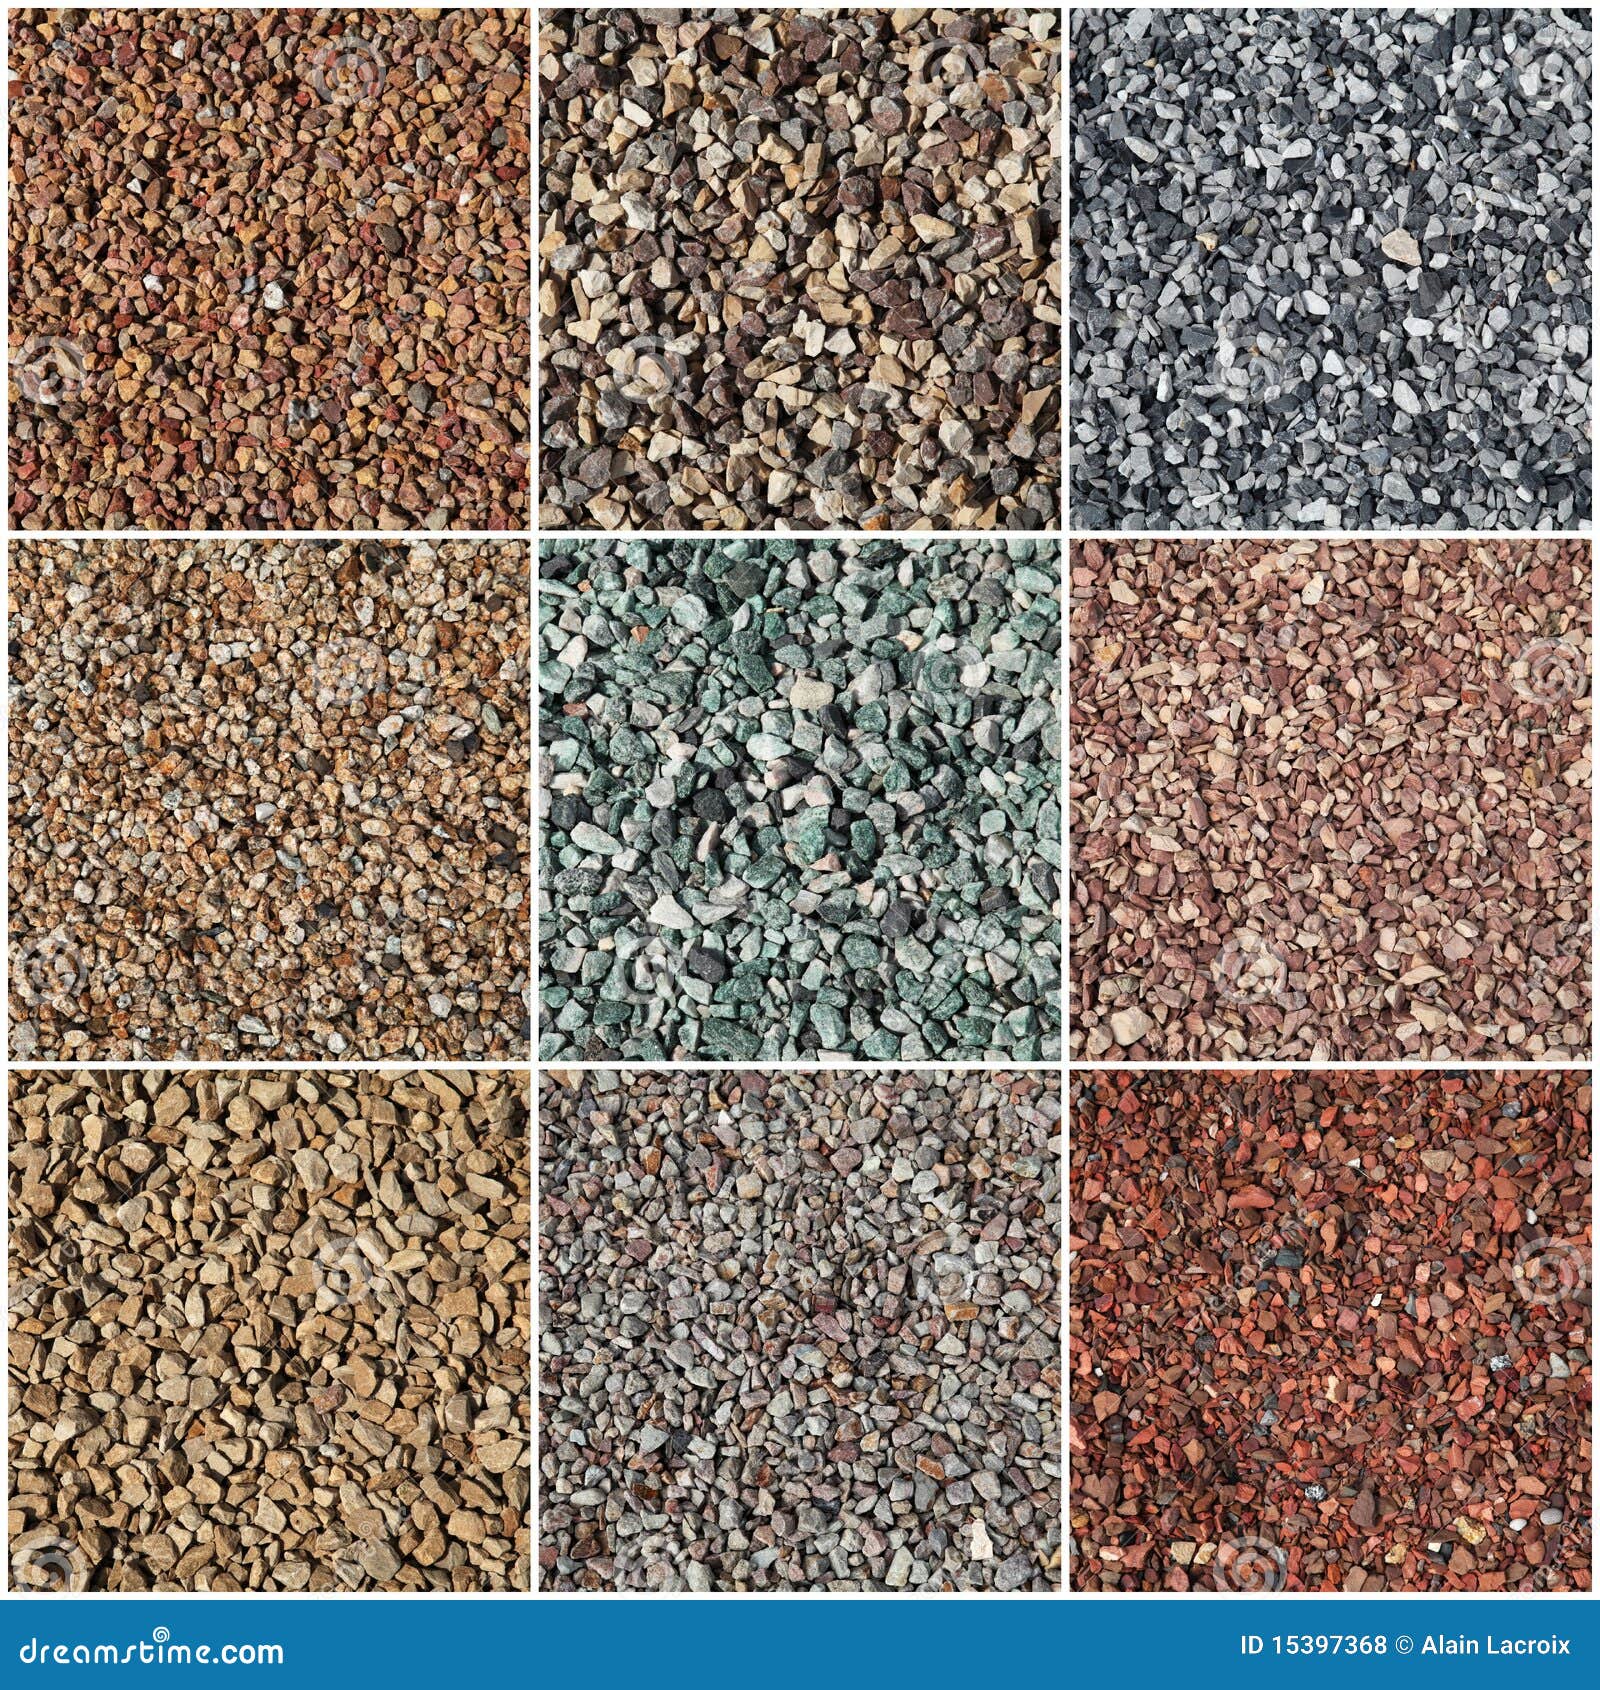  gravel in different colors used as home exterior or garden decoration